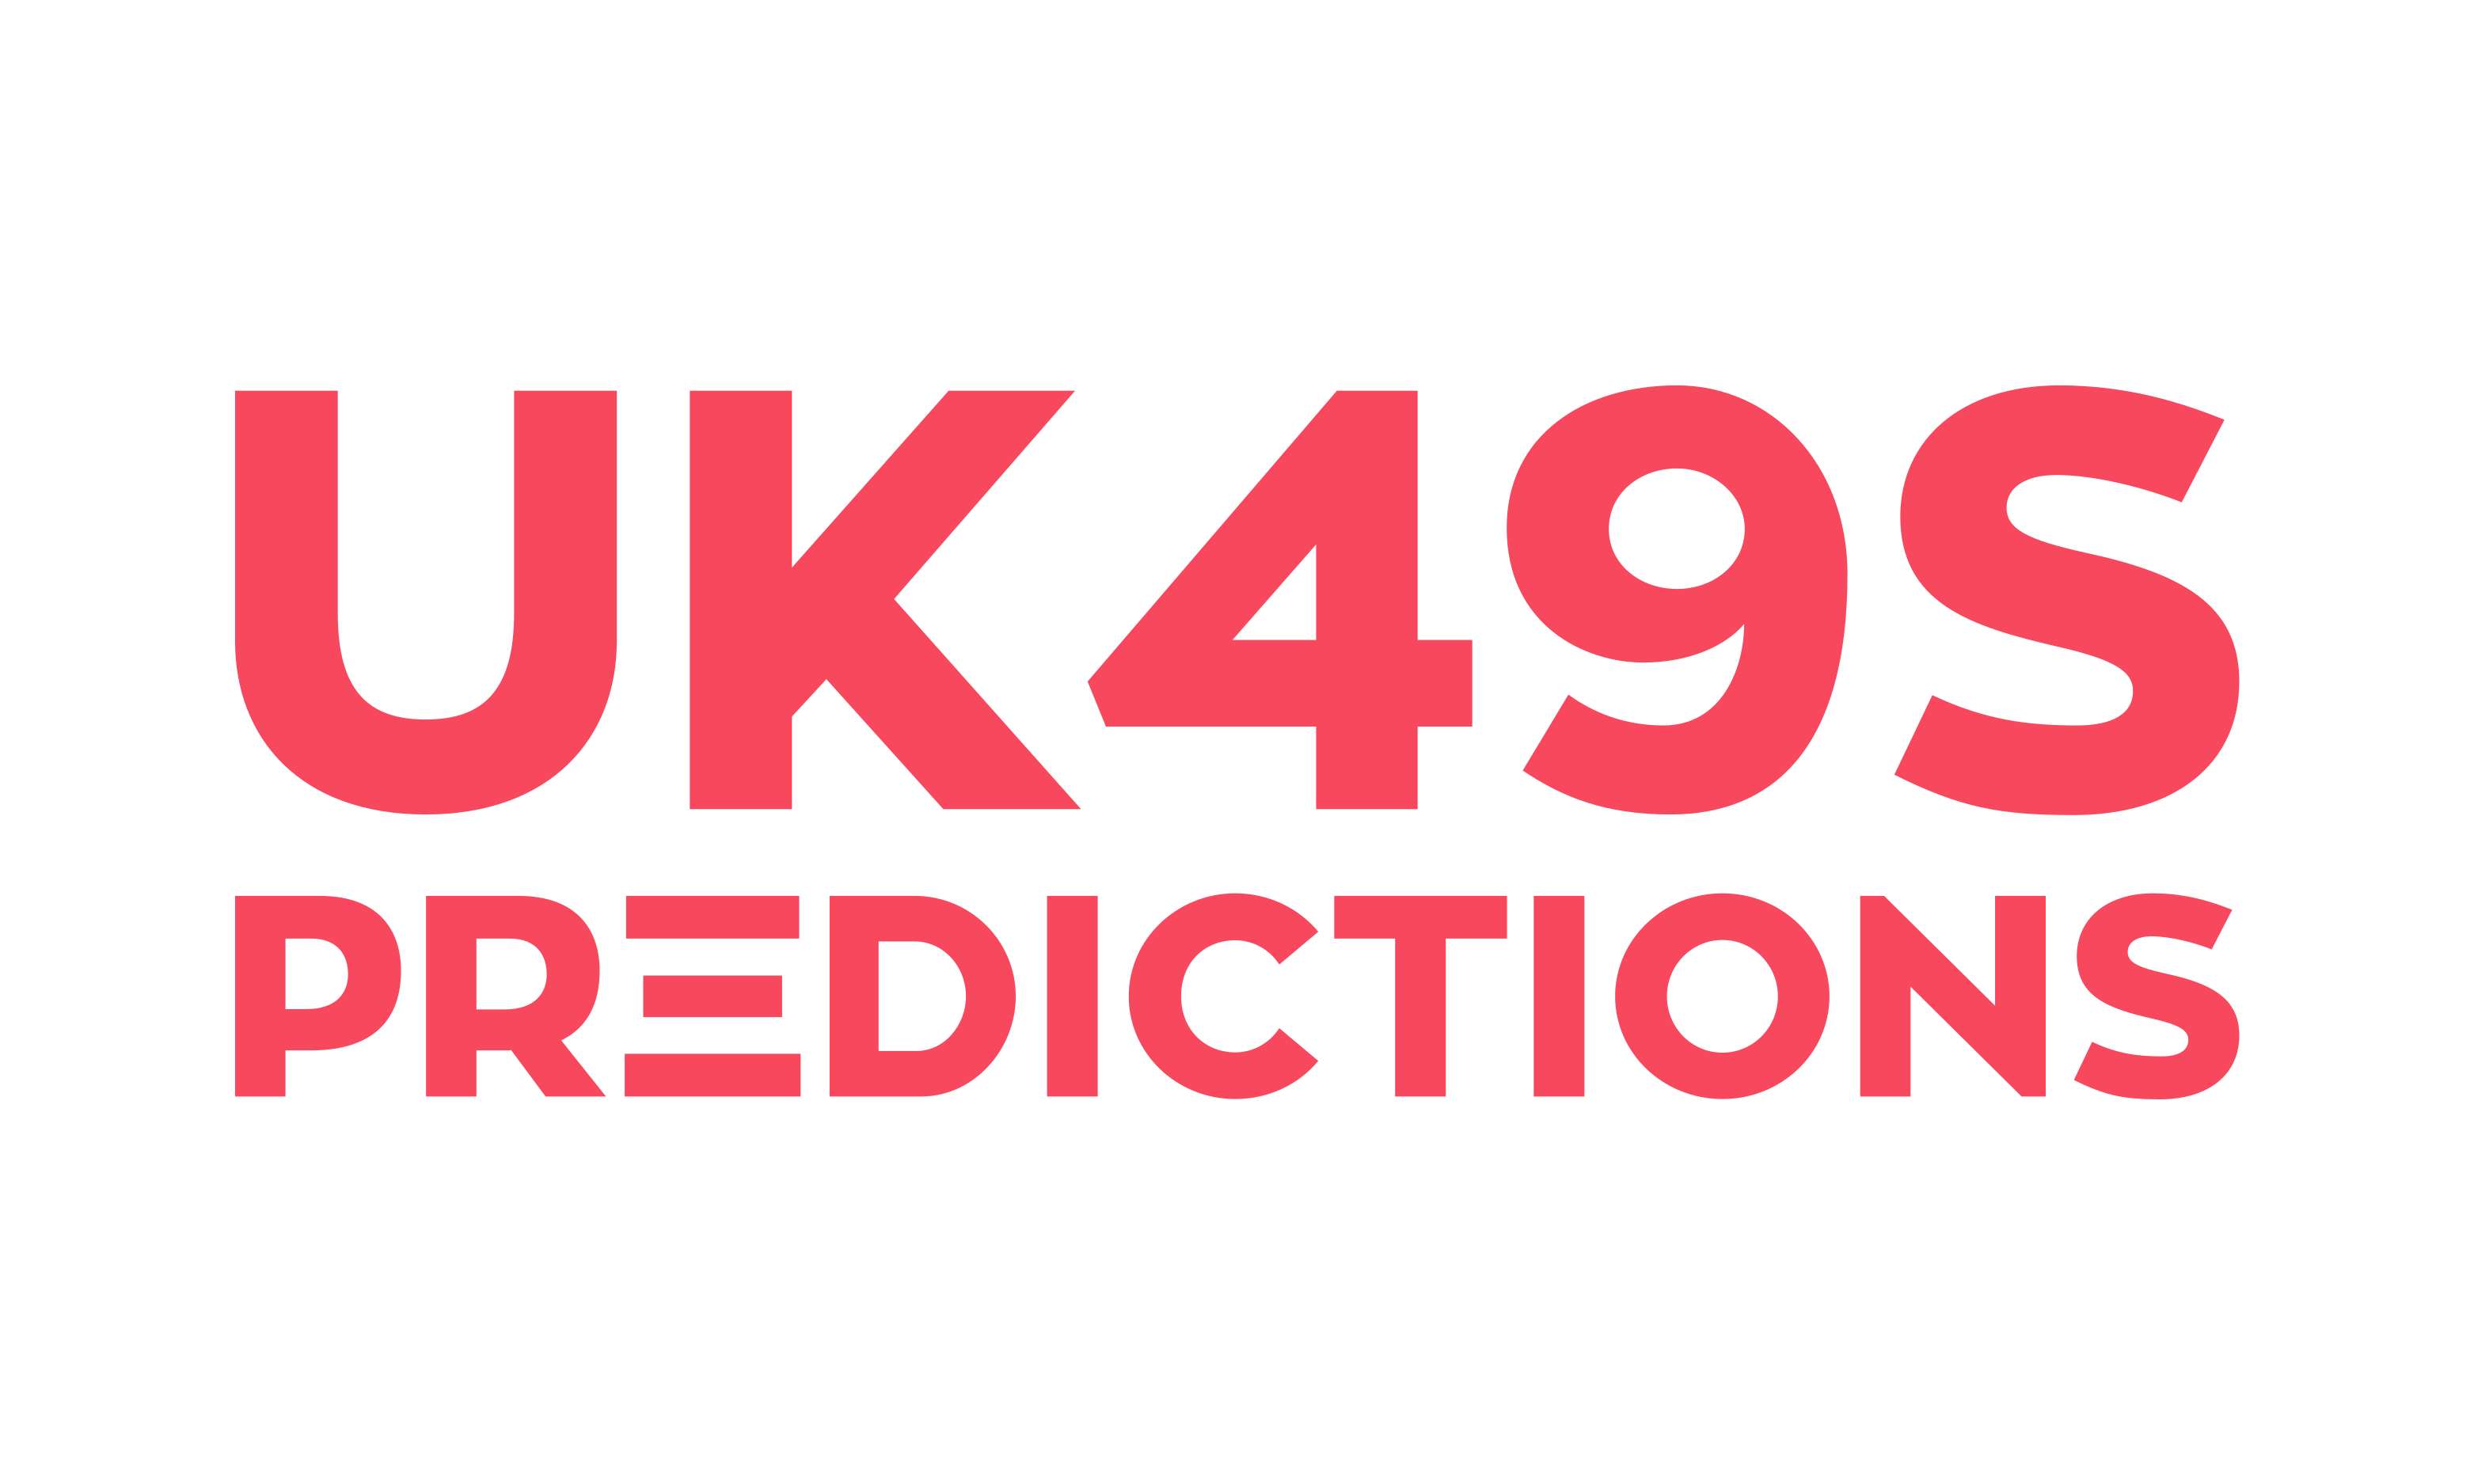 UK 49 Predictions - Today Lunchtime And Teatime Predictions 2023